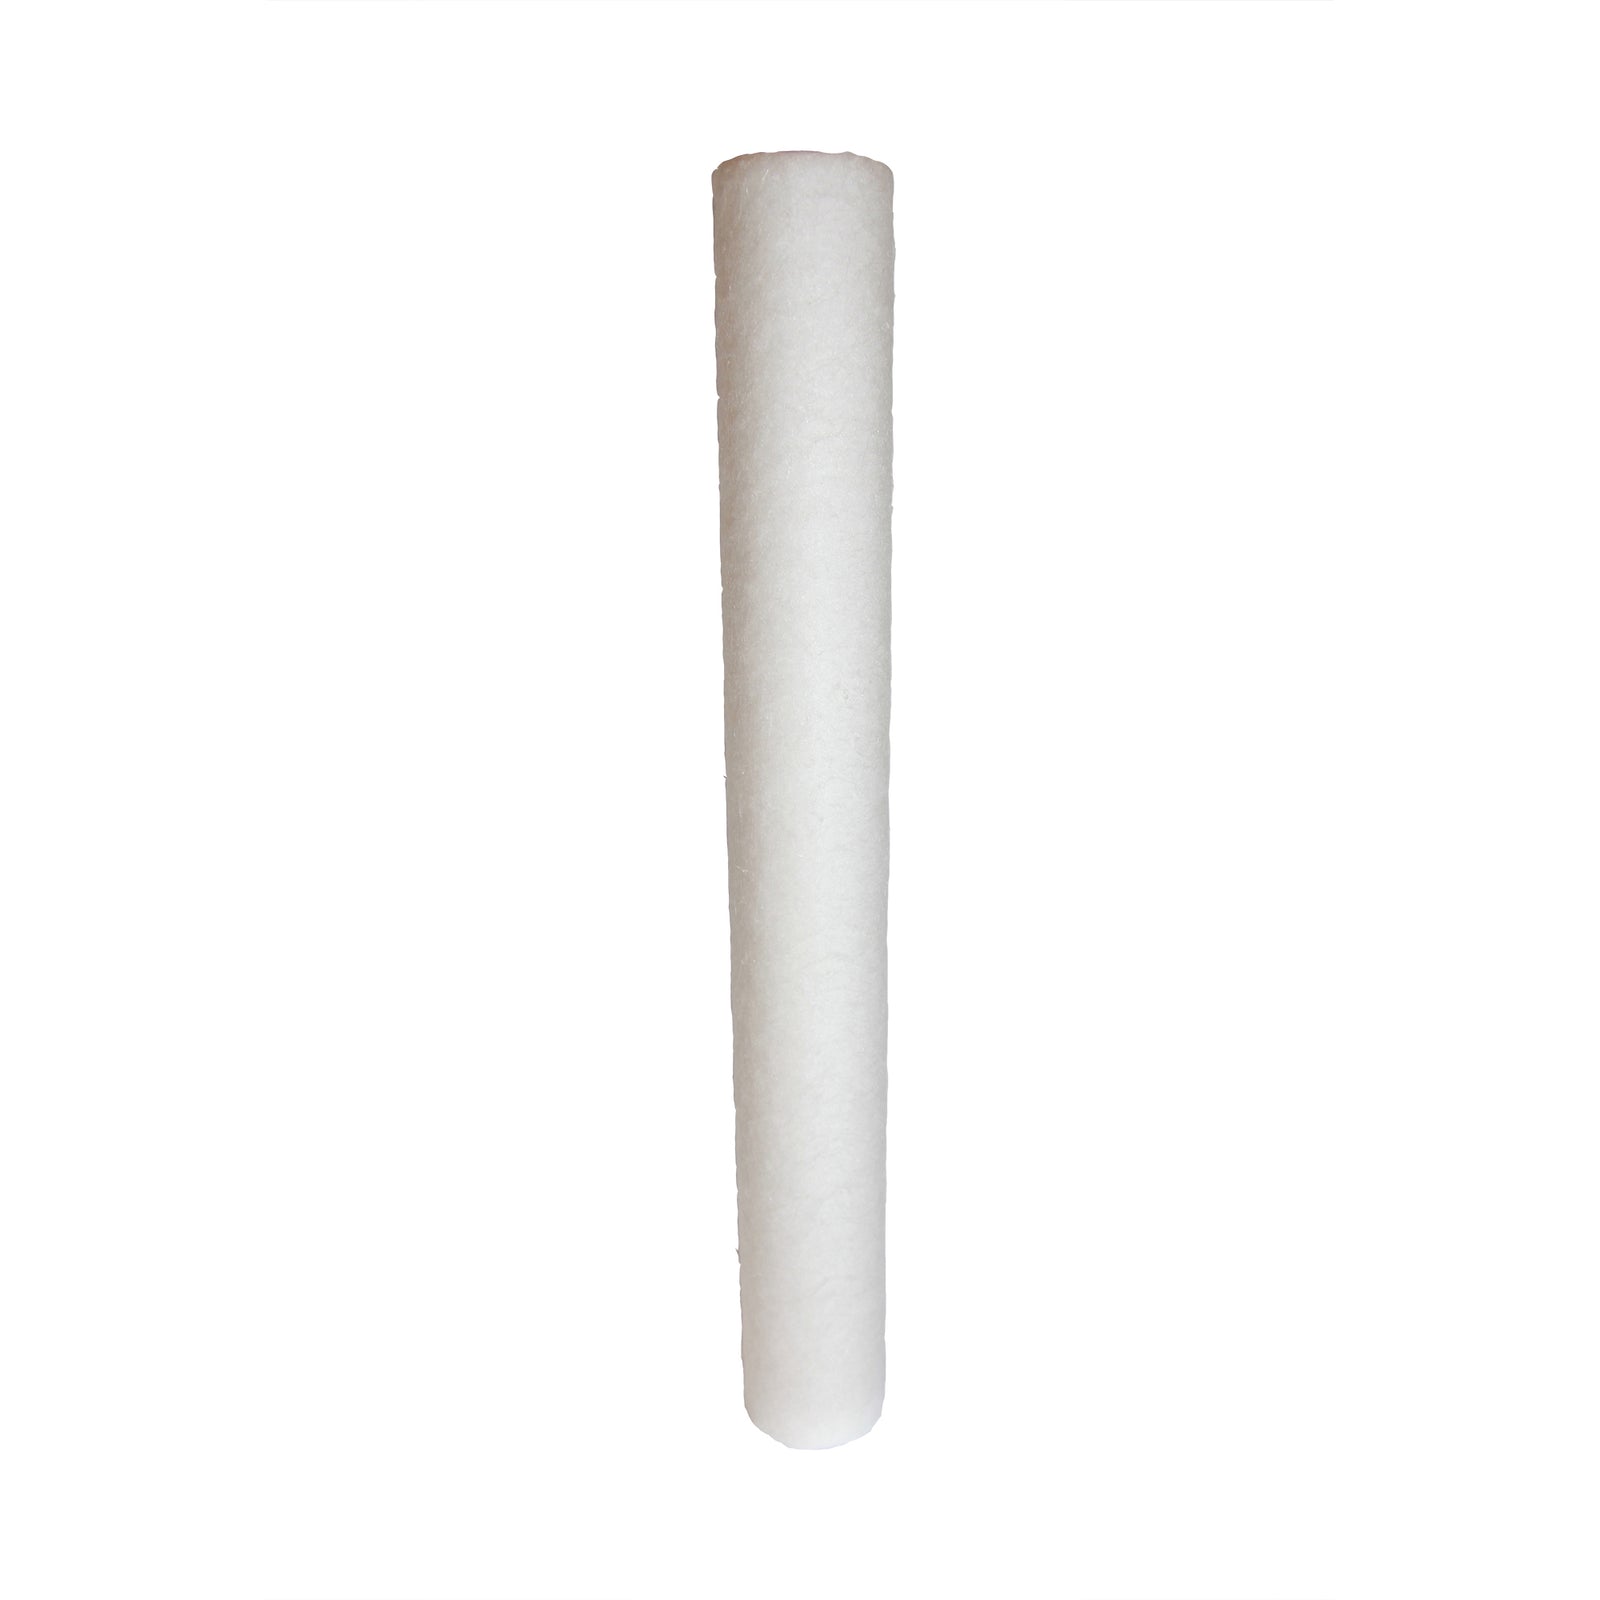 Purtrex PX30-20 Replacement Filter Cartridge